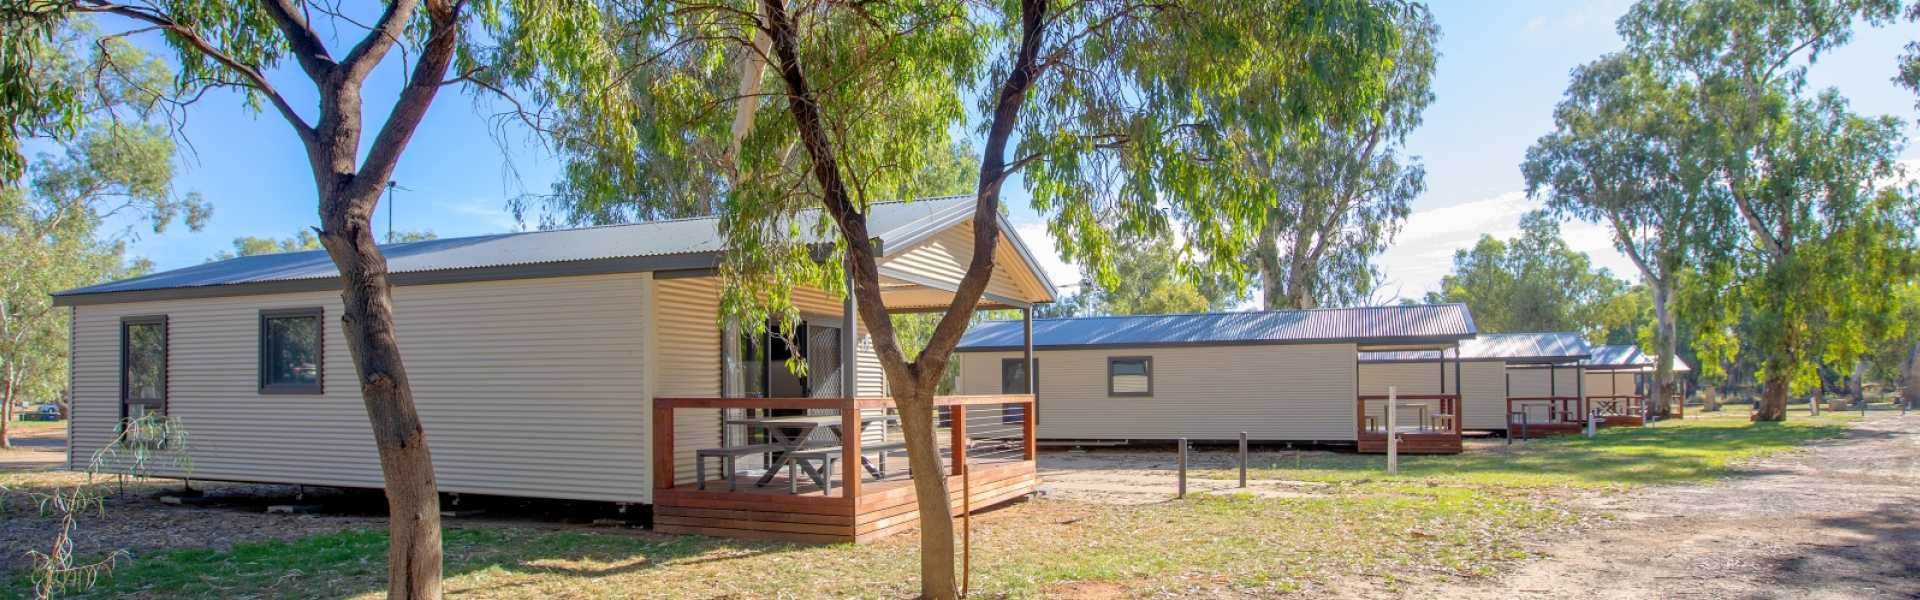 Kui Parks, Apex Riverbeach Holiday Park, Cabins